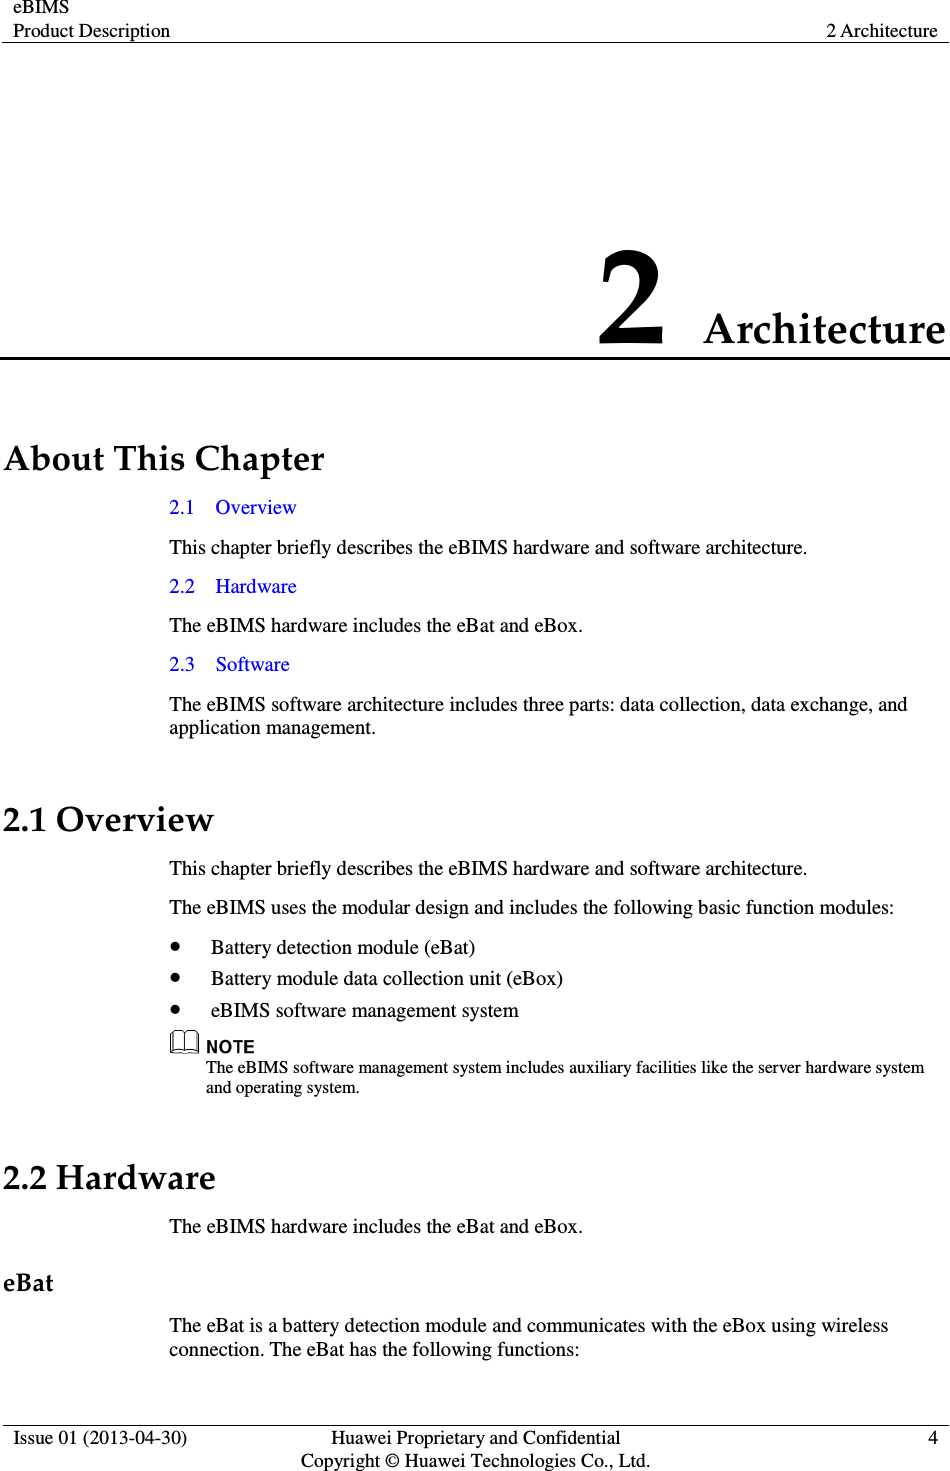 eBIMS Product Description  2 Architecture  Issue 01 (2013-04-30)  Huawei Proprietary and Confidential                                     Copyright © Huawei Technologies Co., Ltd. 4  2 Architecture About This Chapter 2.1    Overview This chapter briefly describes the eBIMS hardware and software architecture. 2.2    Hardware The eBIMS hardware includes the eBat and eBox. 2.3    Software The eBIMS software architecture includes three parts: data collection, data exchange, and application management. 2.1 Overview This chapter briefly describes the eBIMS hardware and software architecture. The eBIMS uses the modular design and includes the following basic function modules:  Battery detection module (eBat)  Battery module data collection unit (eBox)  eBIMS software management system  The eBIMS software management system includes auxiliary facilities like the server hardware system and operating system. 2.2 Hardware The eBIMS hardware includes the eBat and eBox. eBat The eBat is a battery detection module and communicates with the eBox using wireless connection. The eBat has the following functions: 